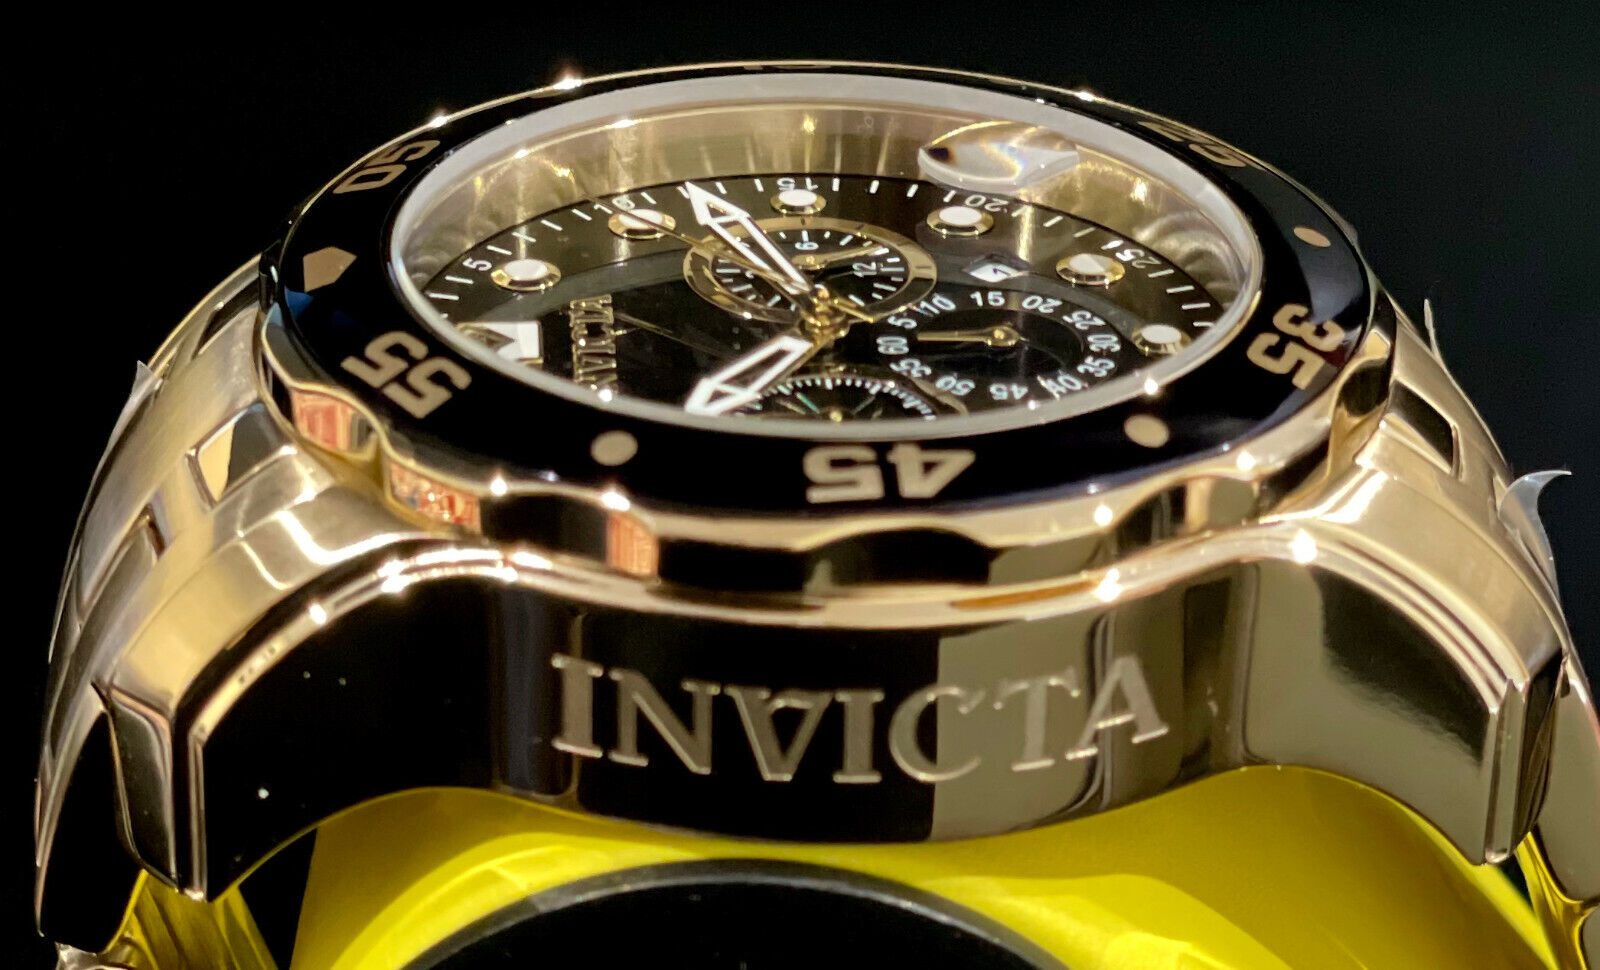 Invicta Mens PRO DIVER SCUBA Chronograph Black Dial 18Kt Gold Plated Watch  0072